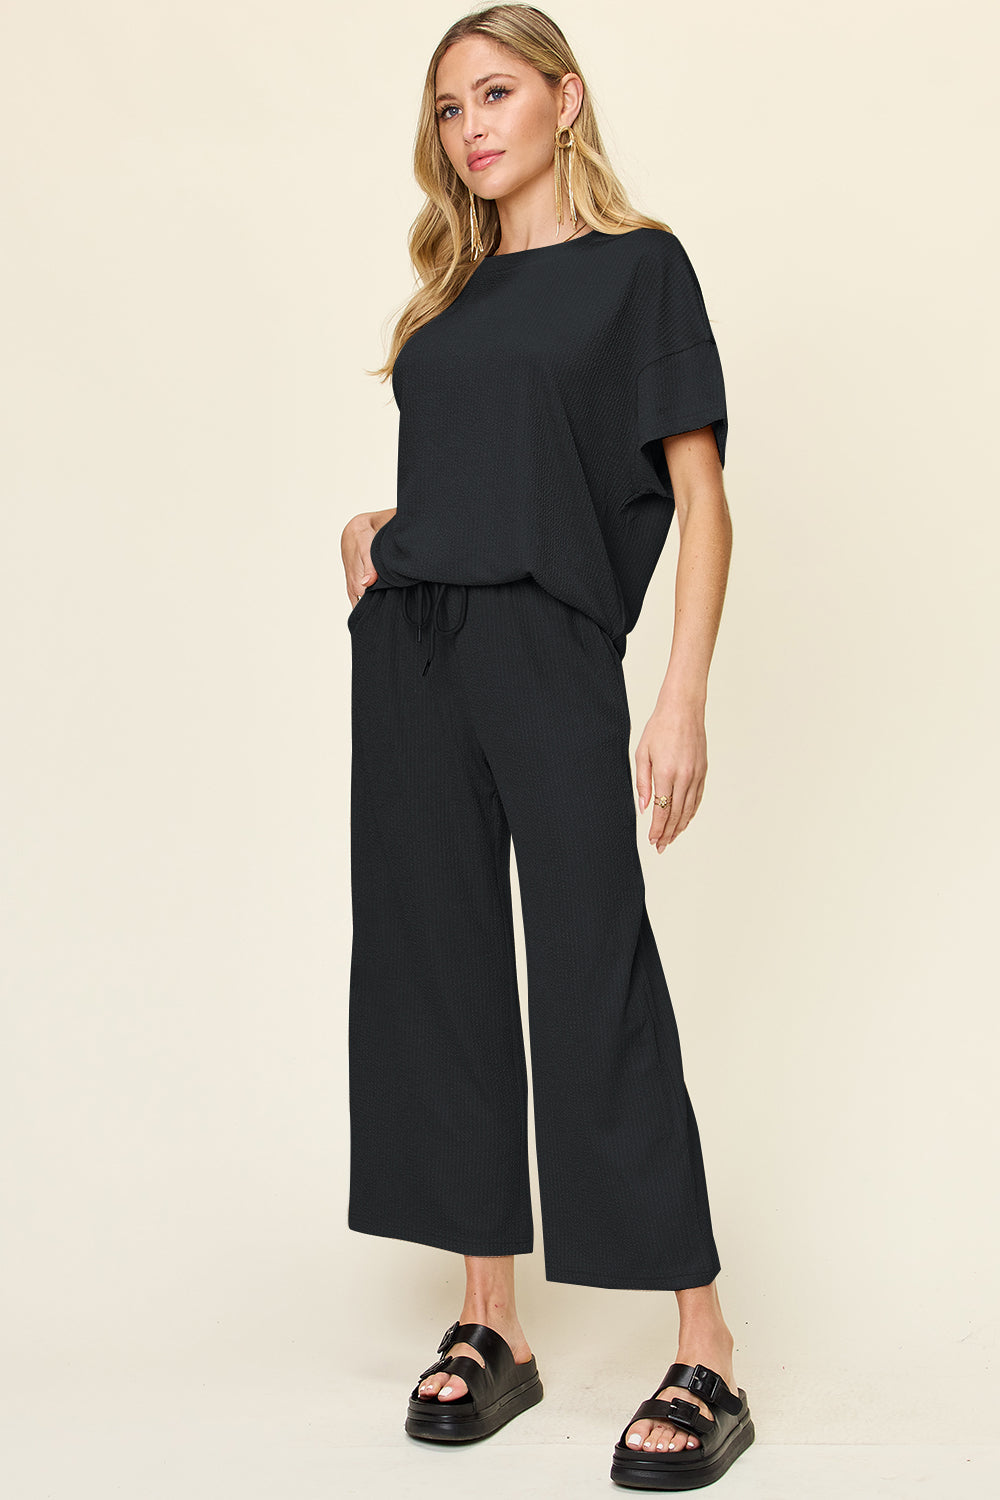 Textured Knit Top and Wide Leg Pant Set